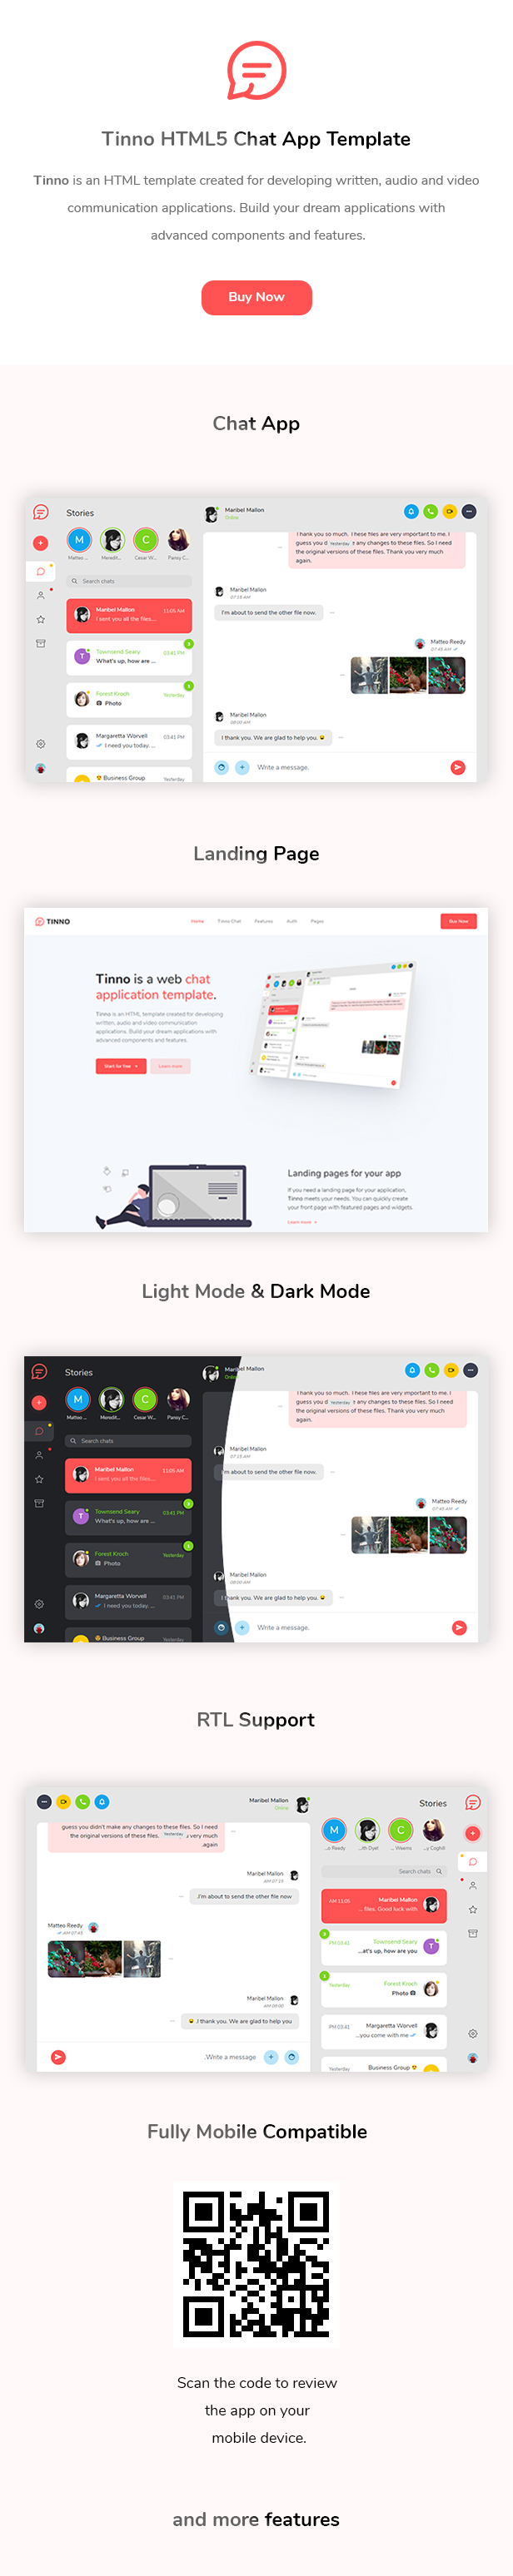 Tinno - HTML5 Chat App Template - 1